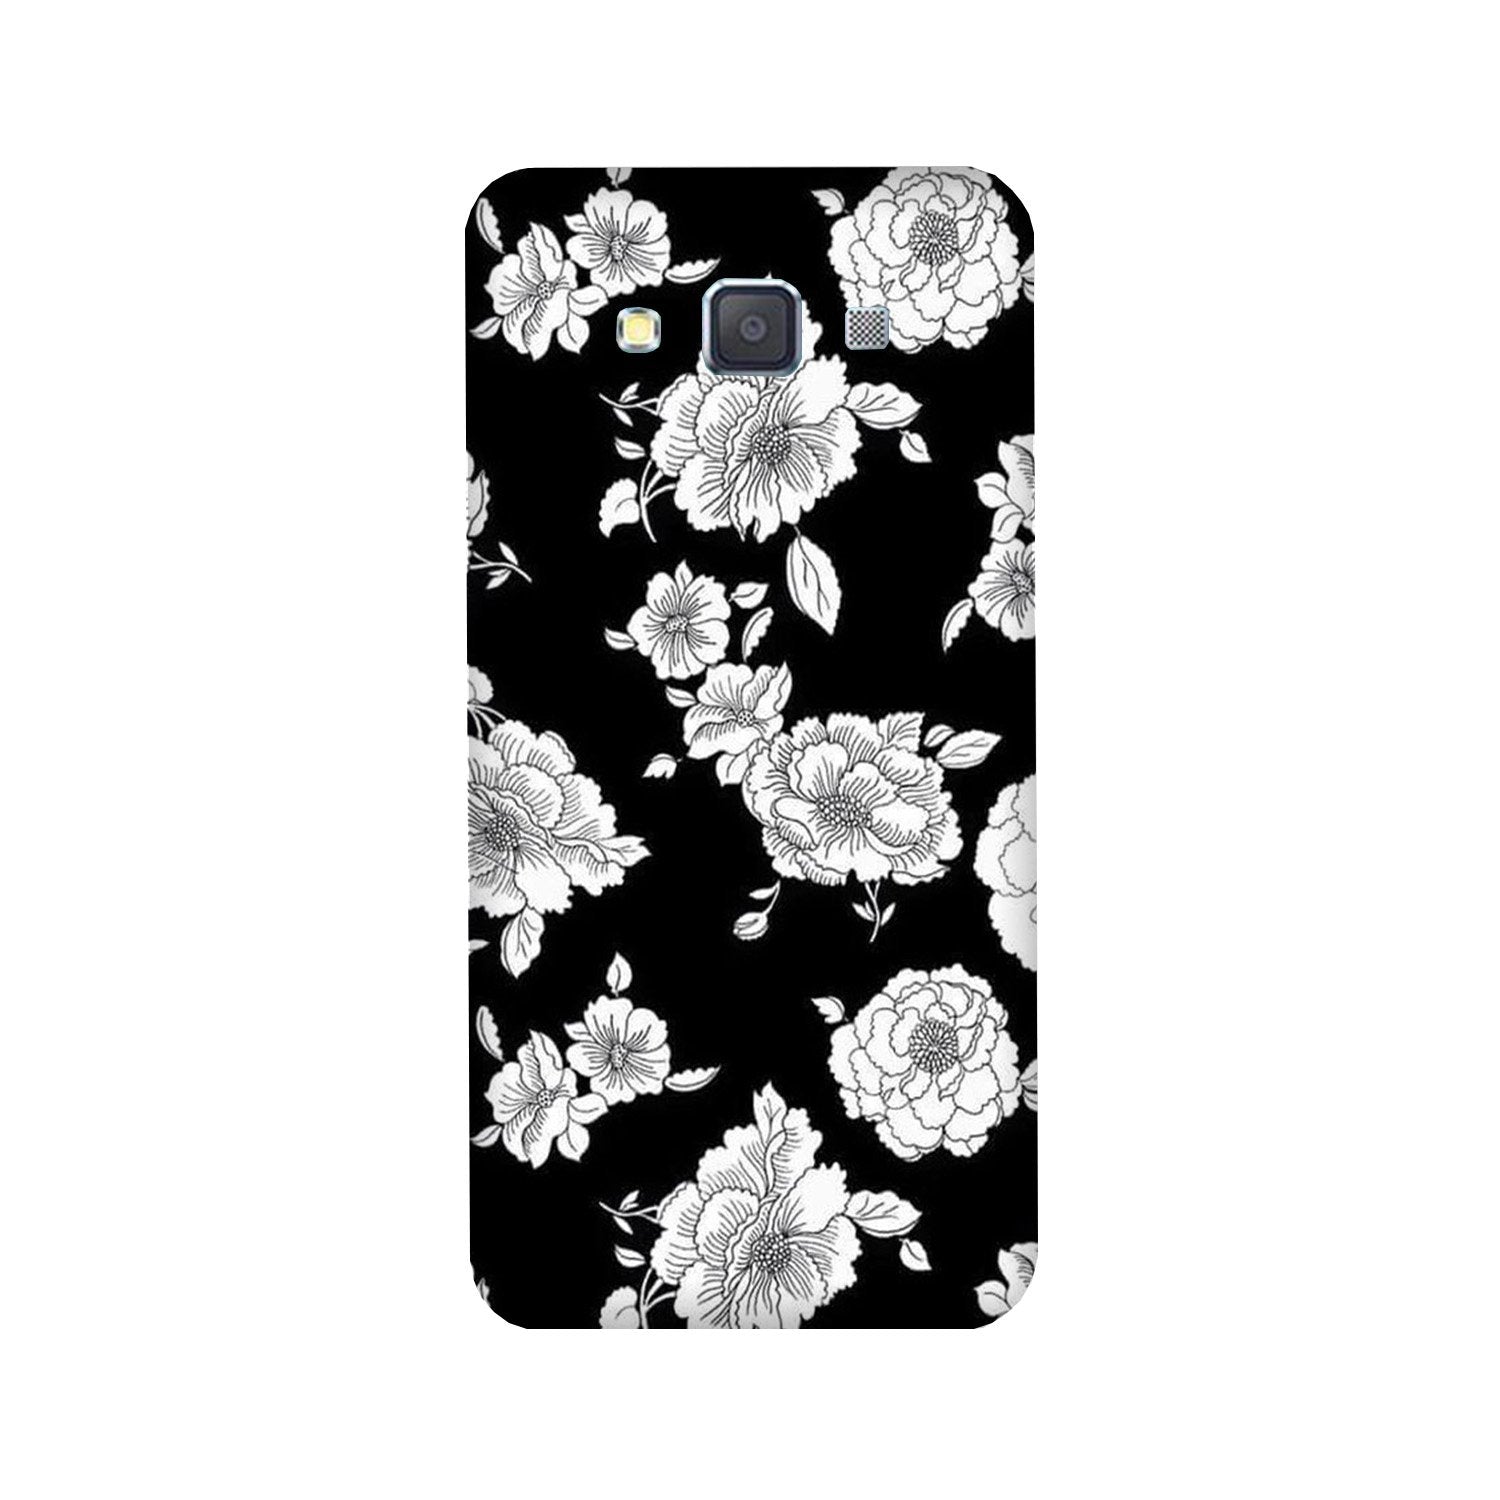 White flowers Black Background Case for Galaxy Grand Prime